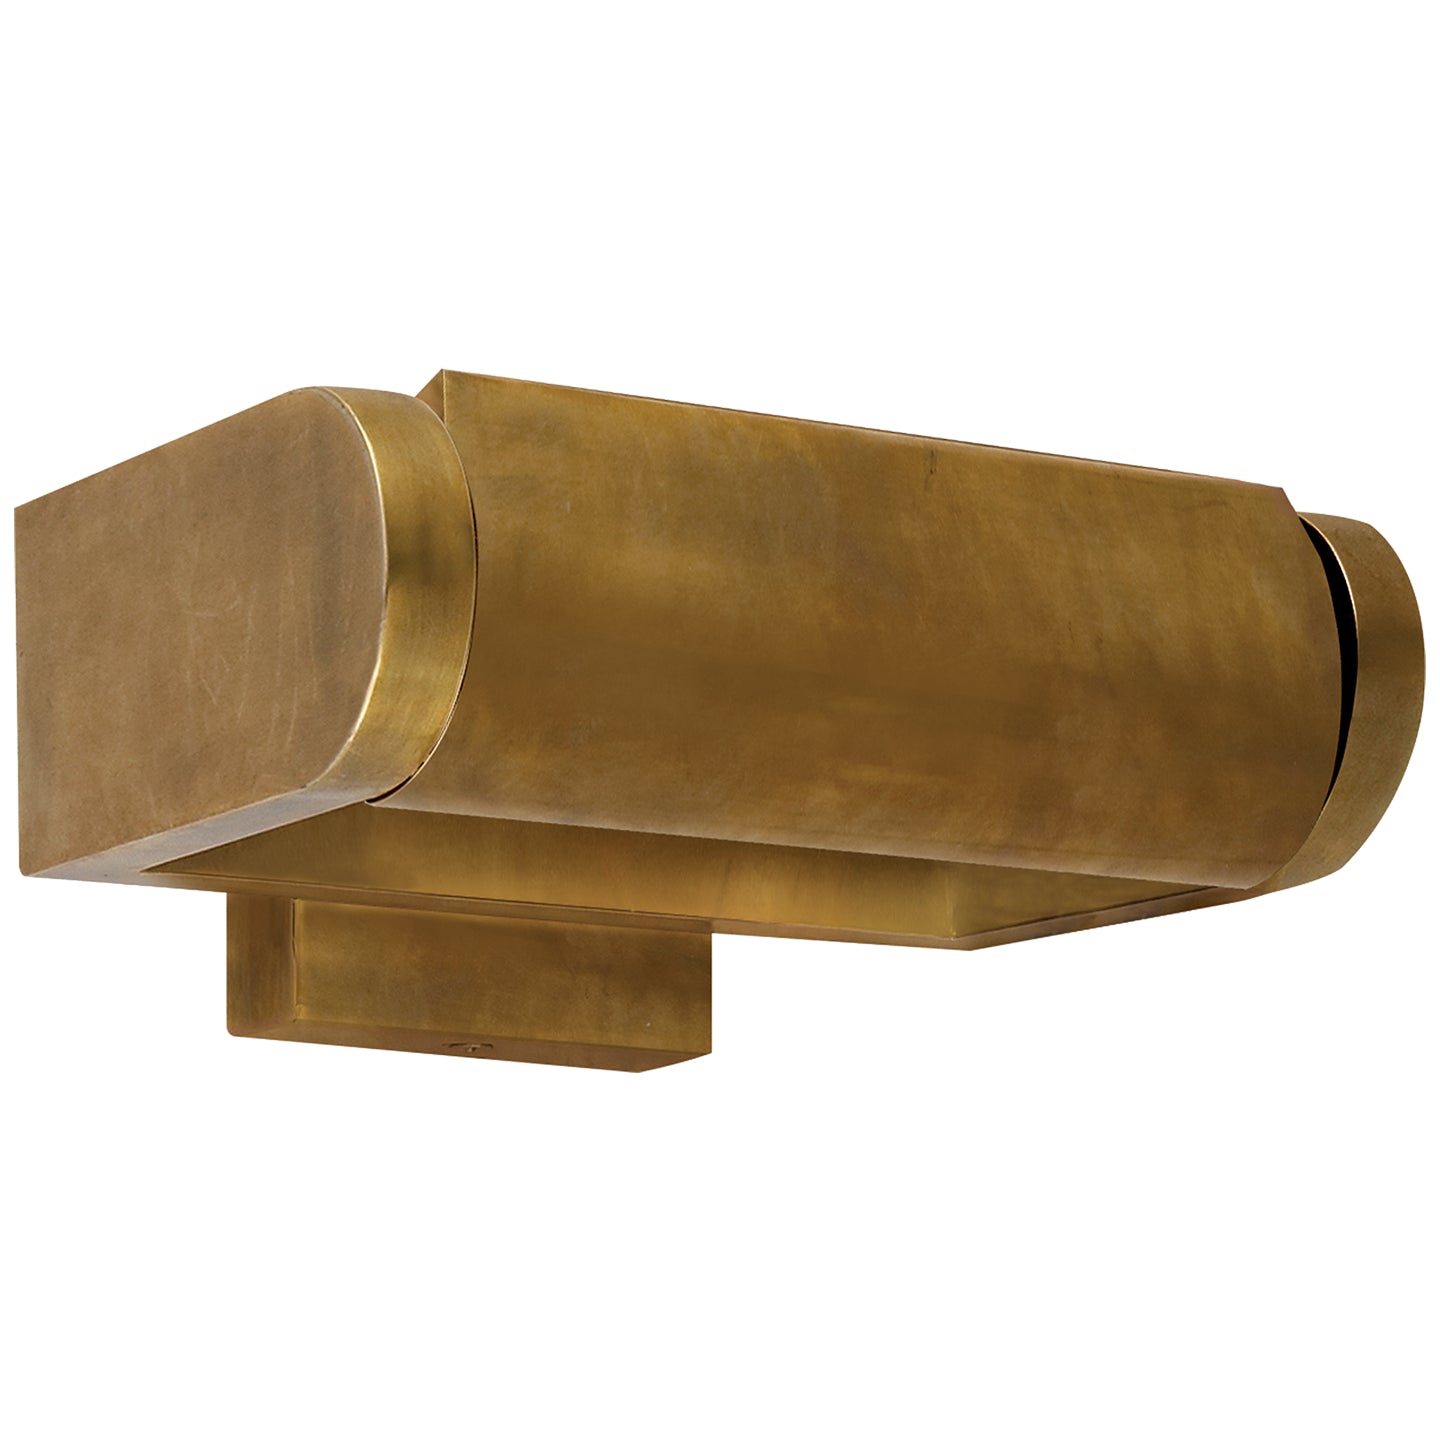 Visual Comfort Signature - TOB 2020HAB - One Light Wall Sconce - David Art - Hand-Rubbed Antique Brass